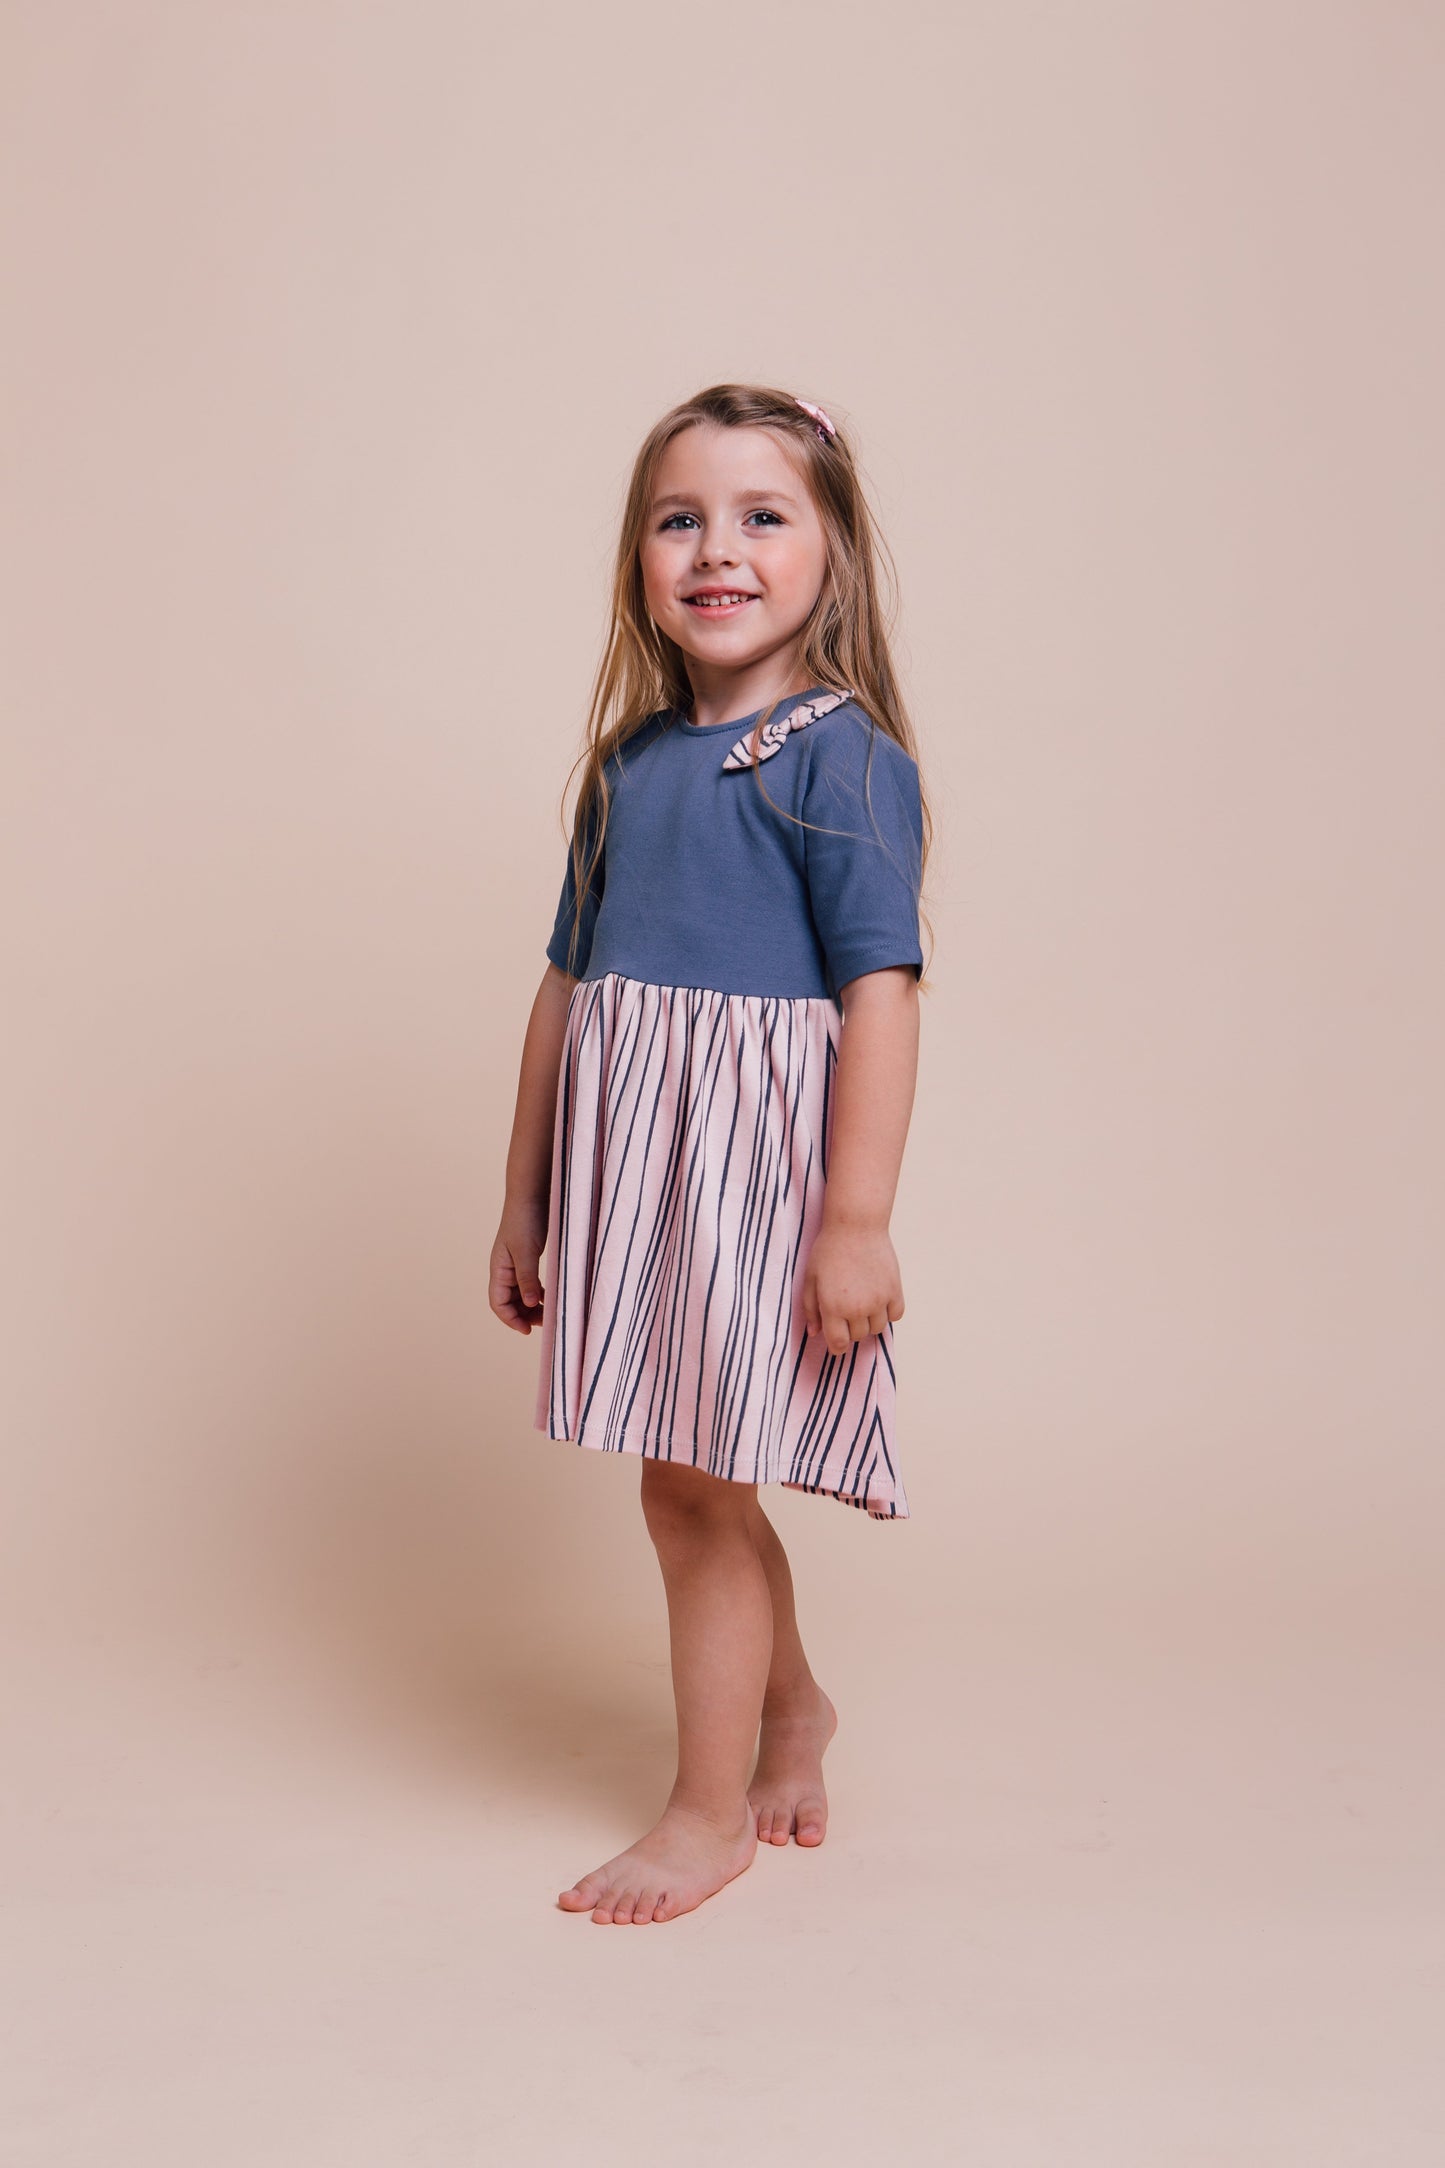 Artie - Girls Blue and Pink Dress with Navy Stripes 9 to 12 months - Stylemykid.com